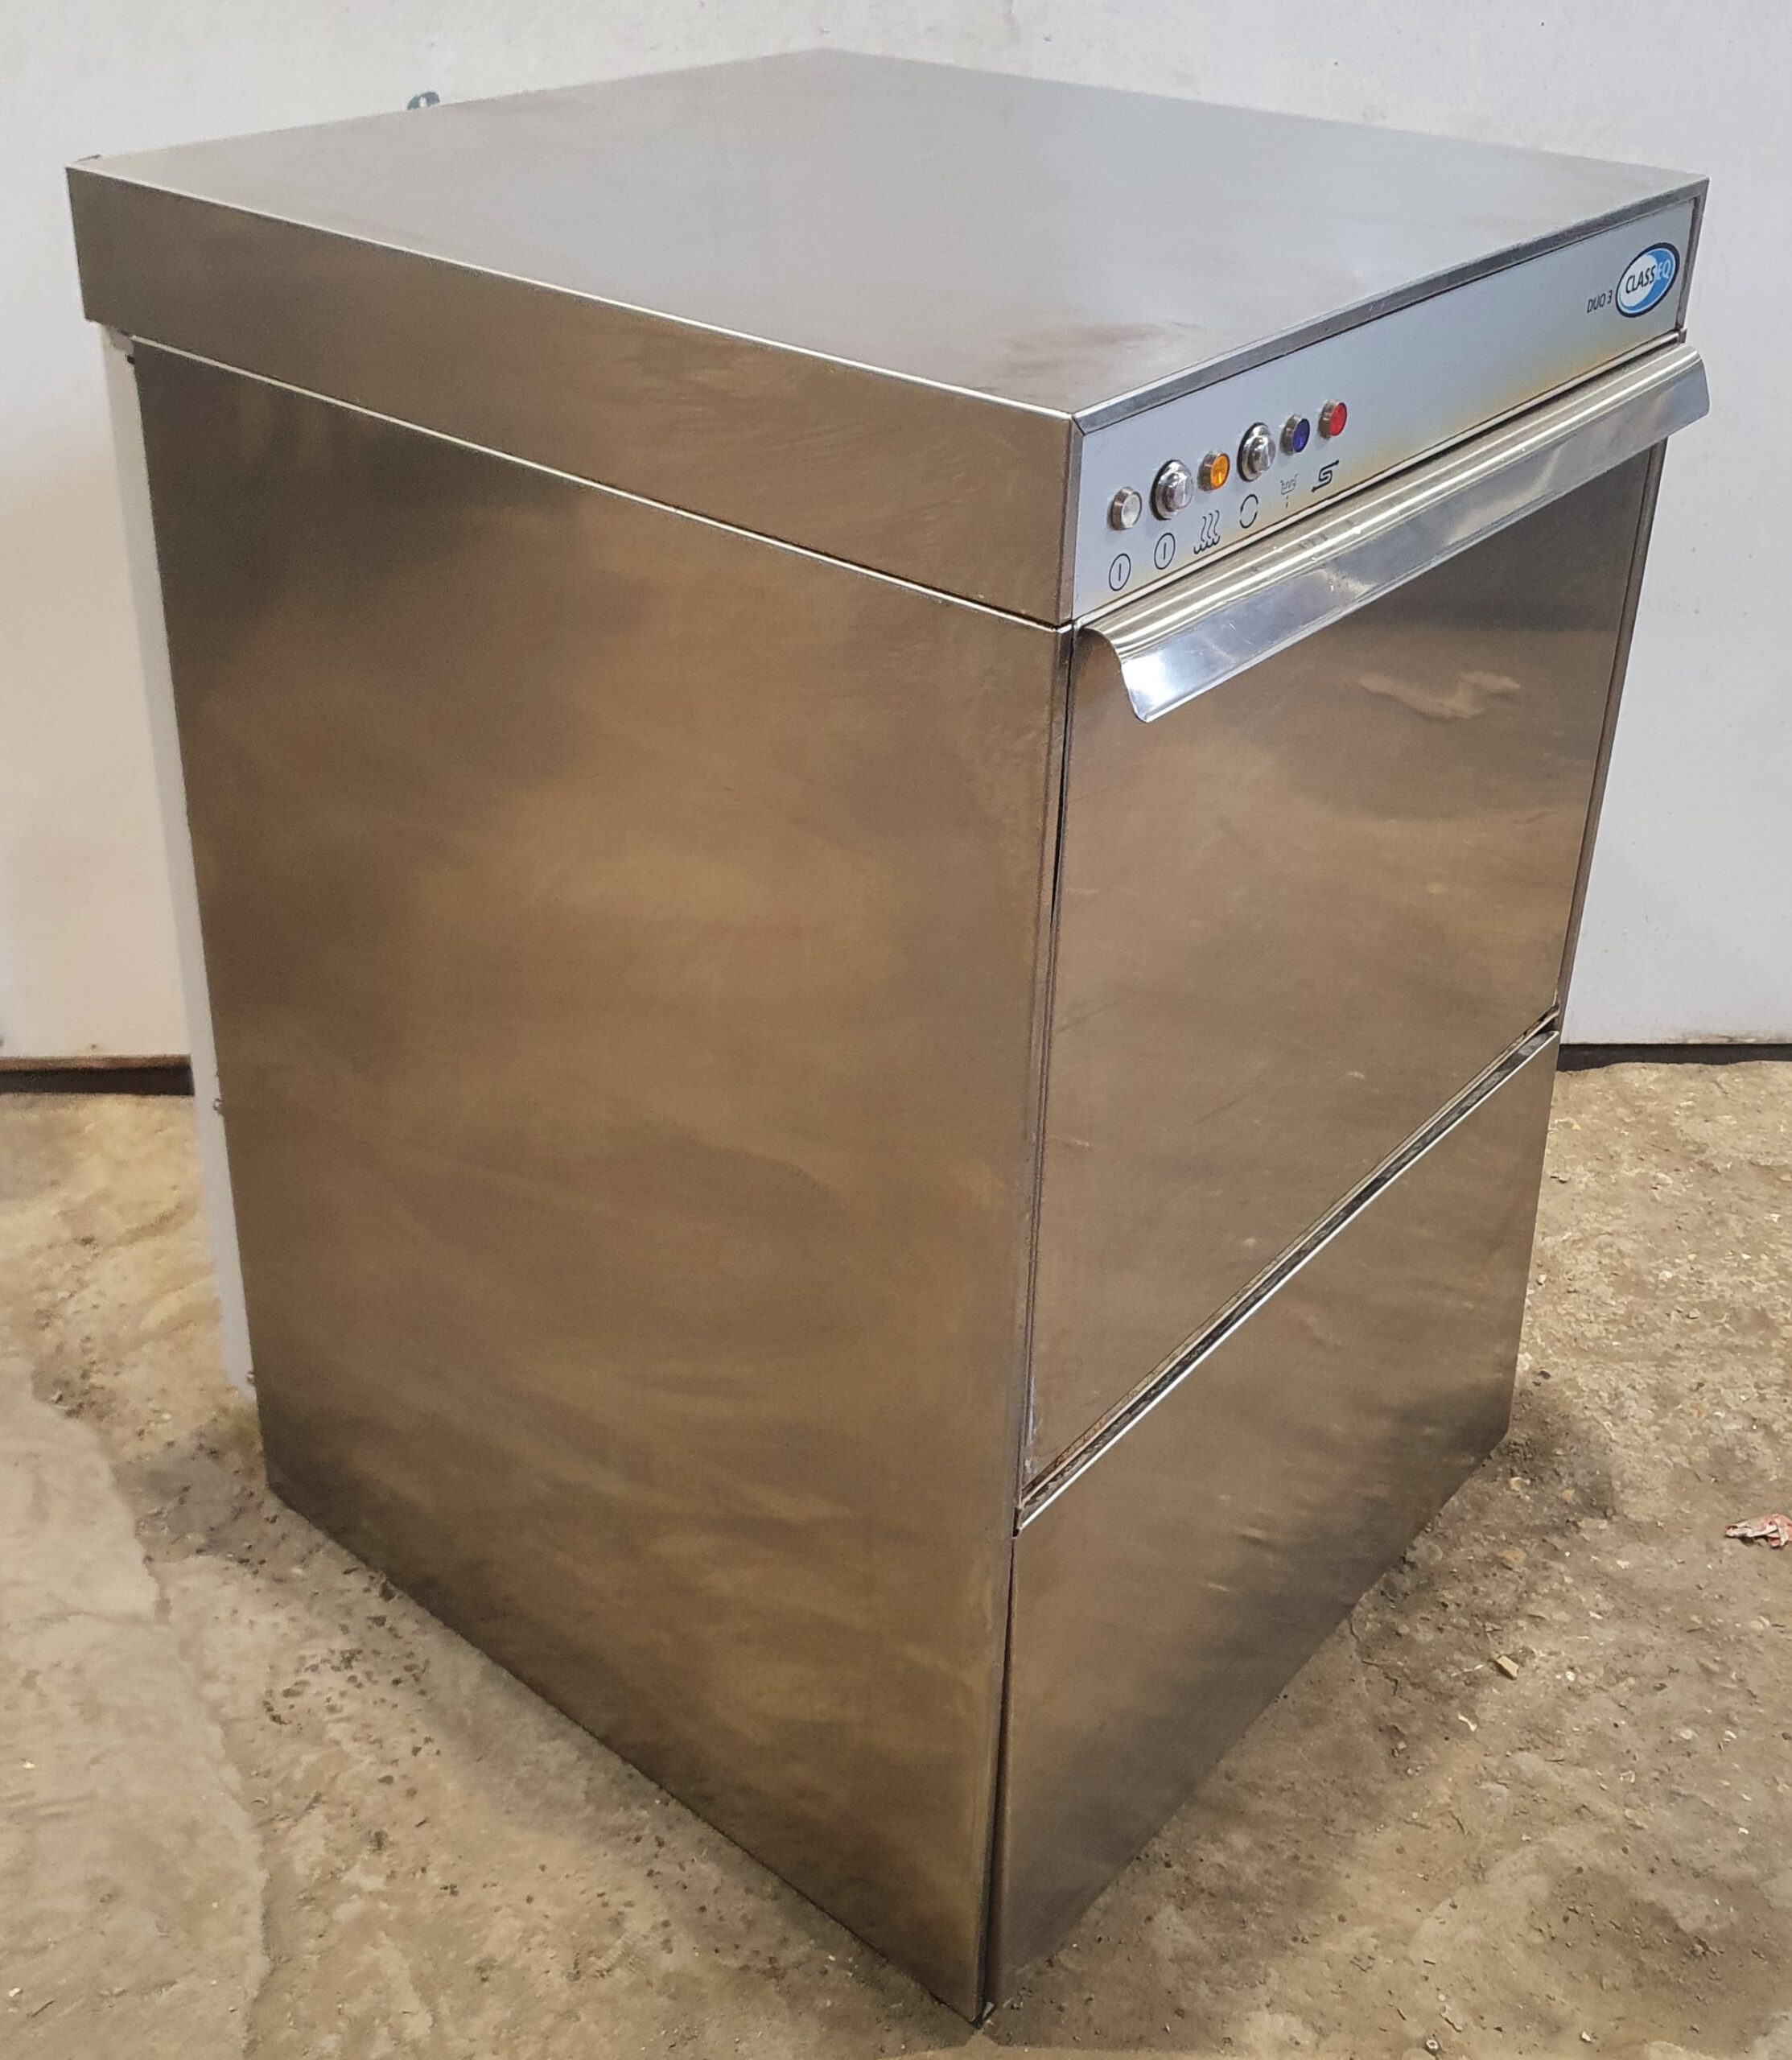 CLASSEQ Duo 3 Under Counter Dish Washer – B Grade ex demo use only.